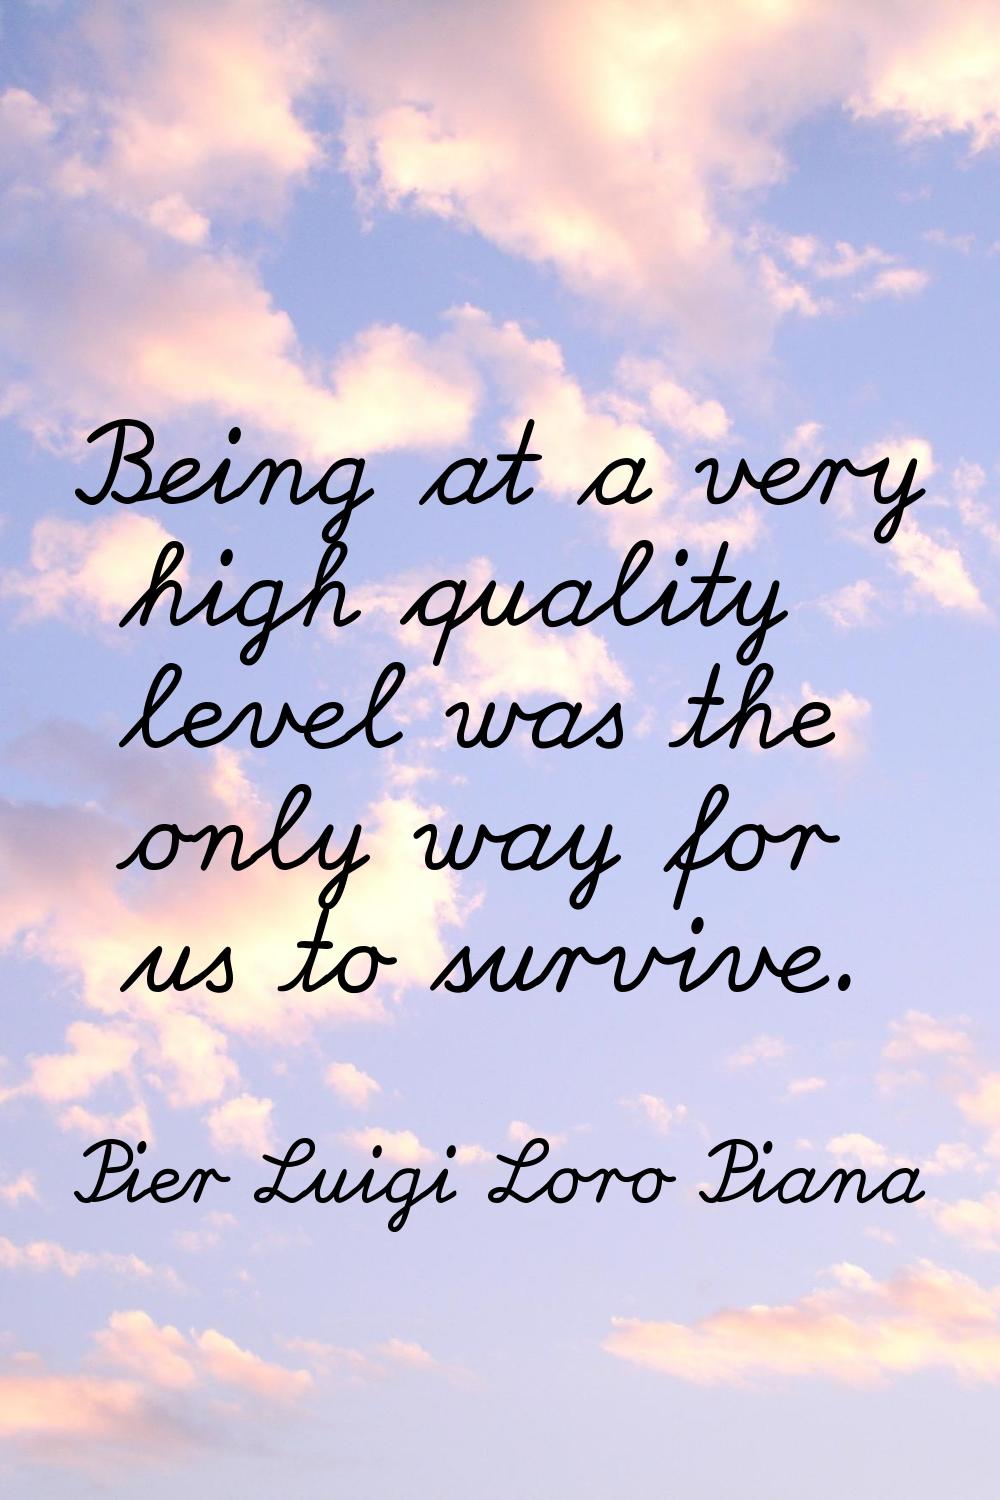 Being at a very high quality level was the only way for us to survive.